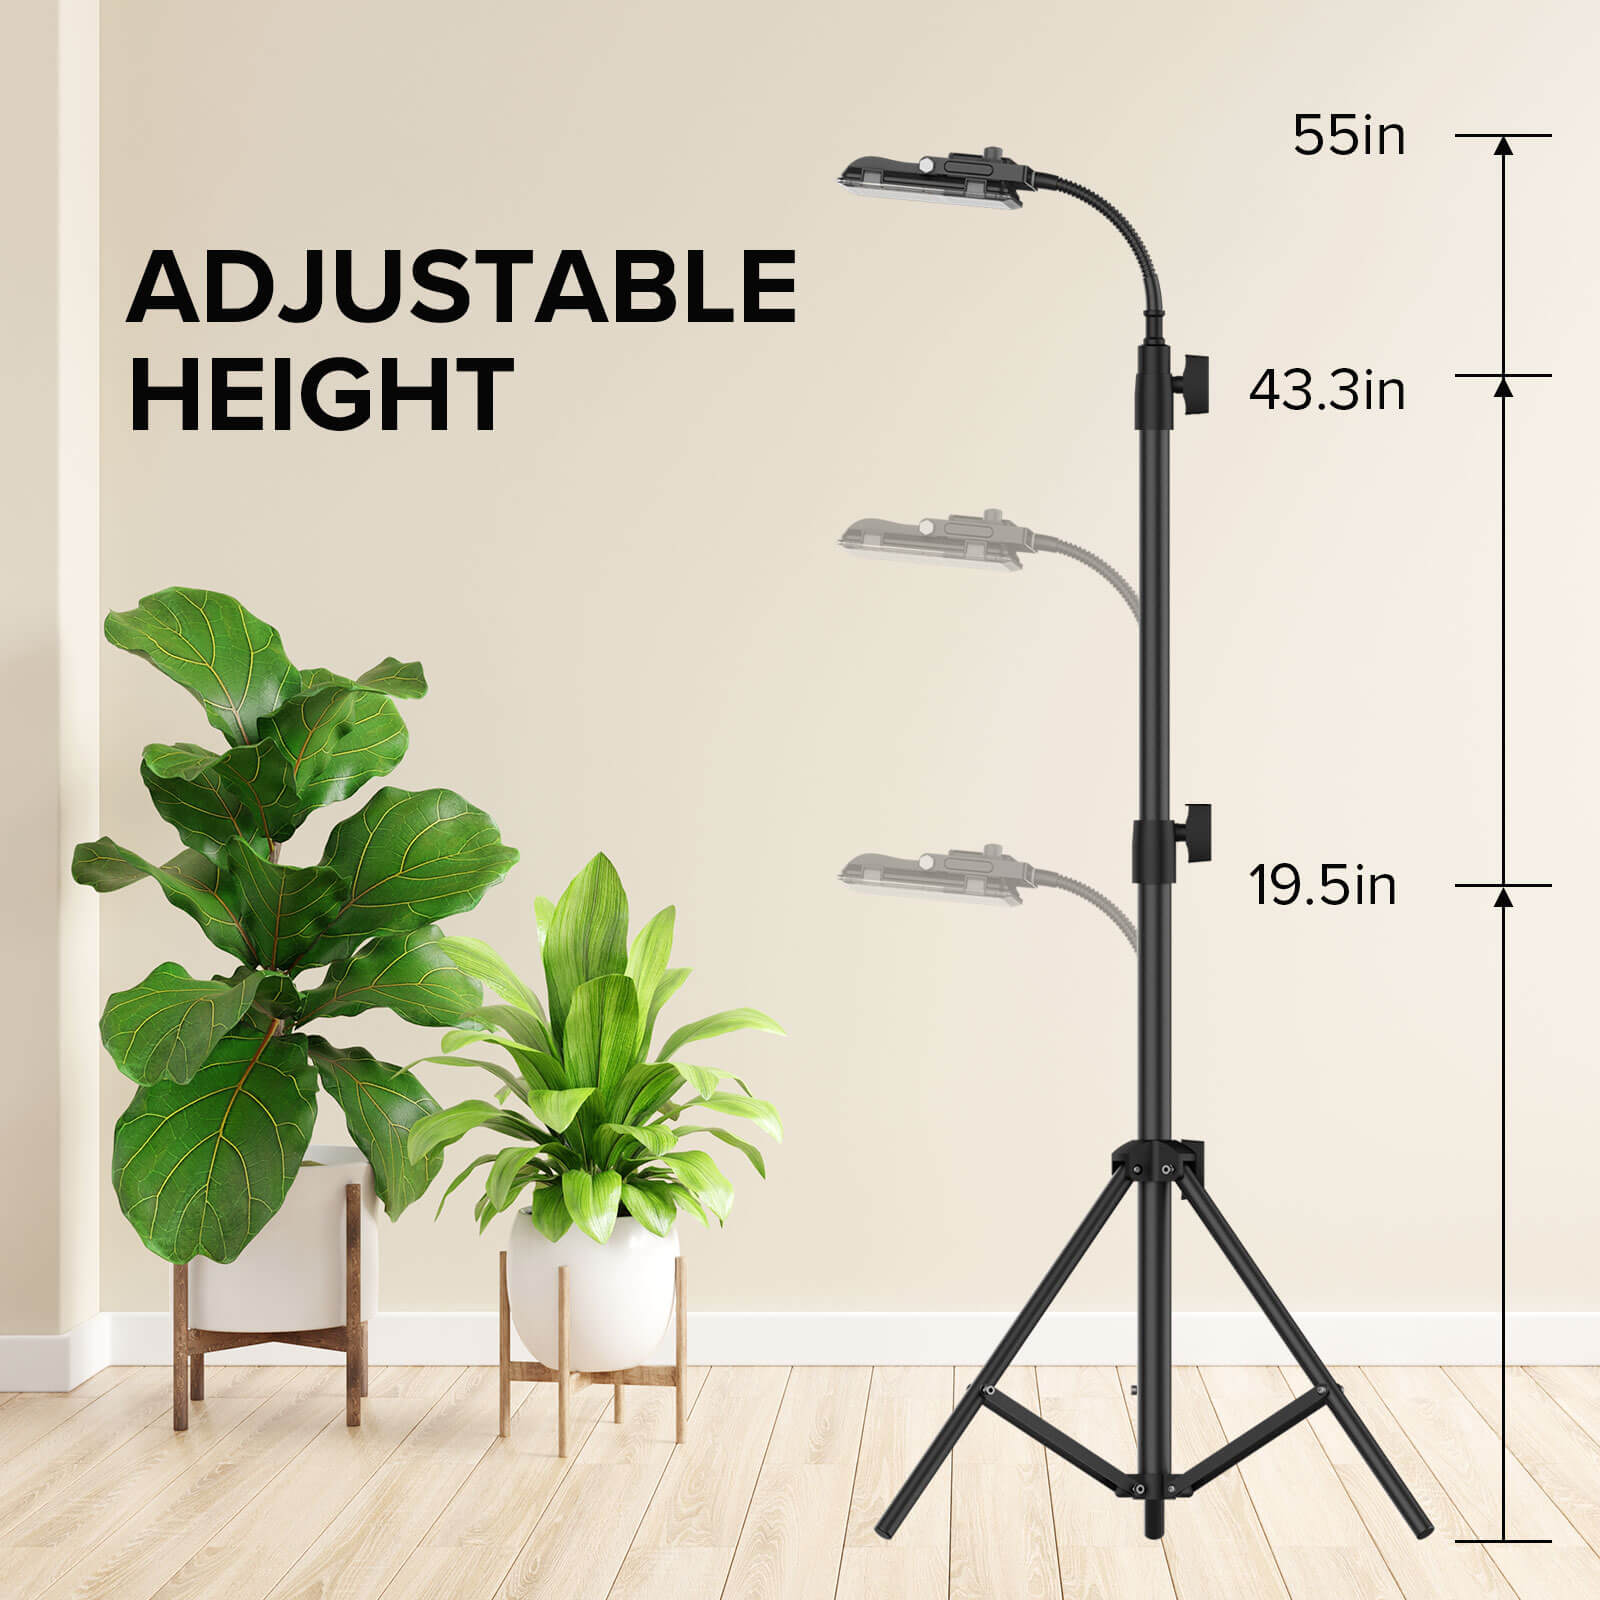 30W LED Grow Light With Tripod Stand，height adjustable.